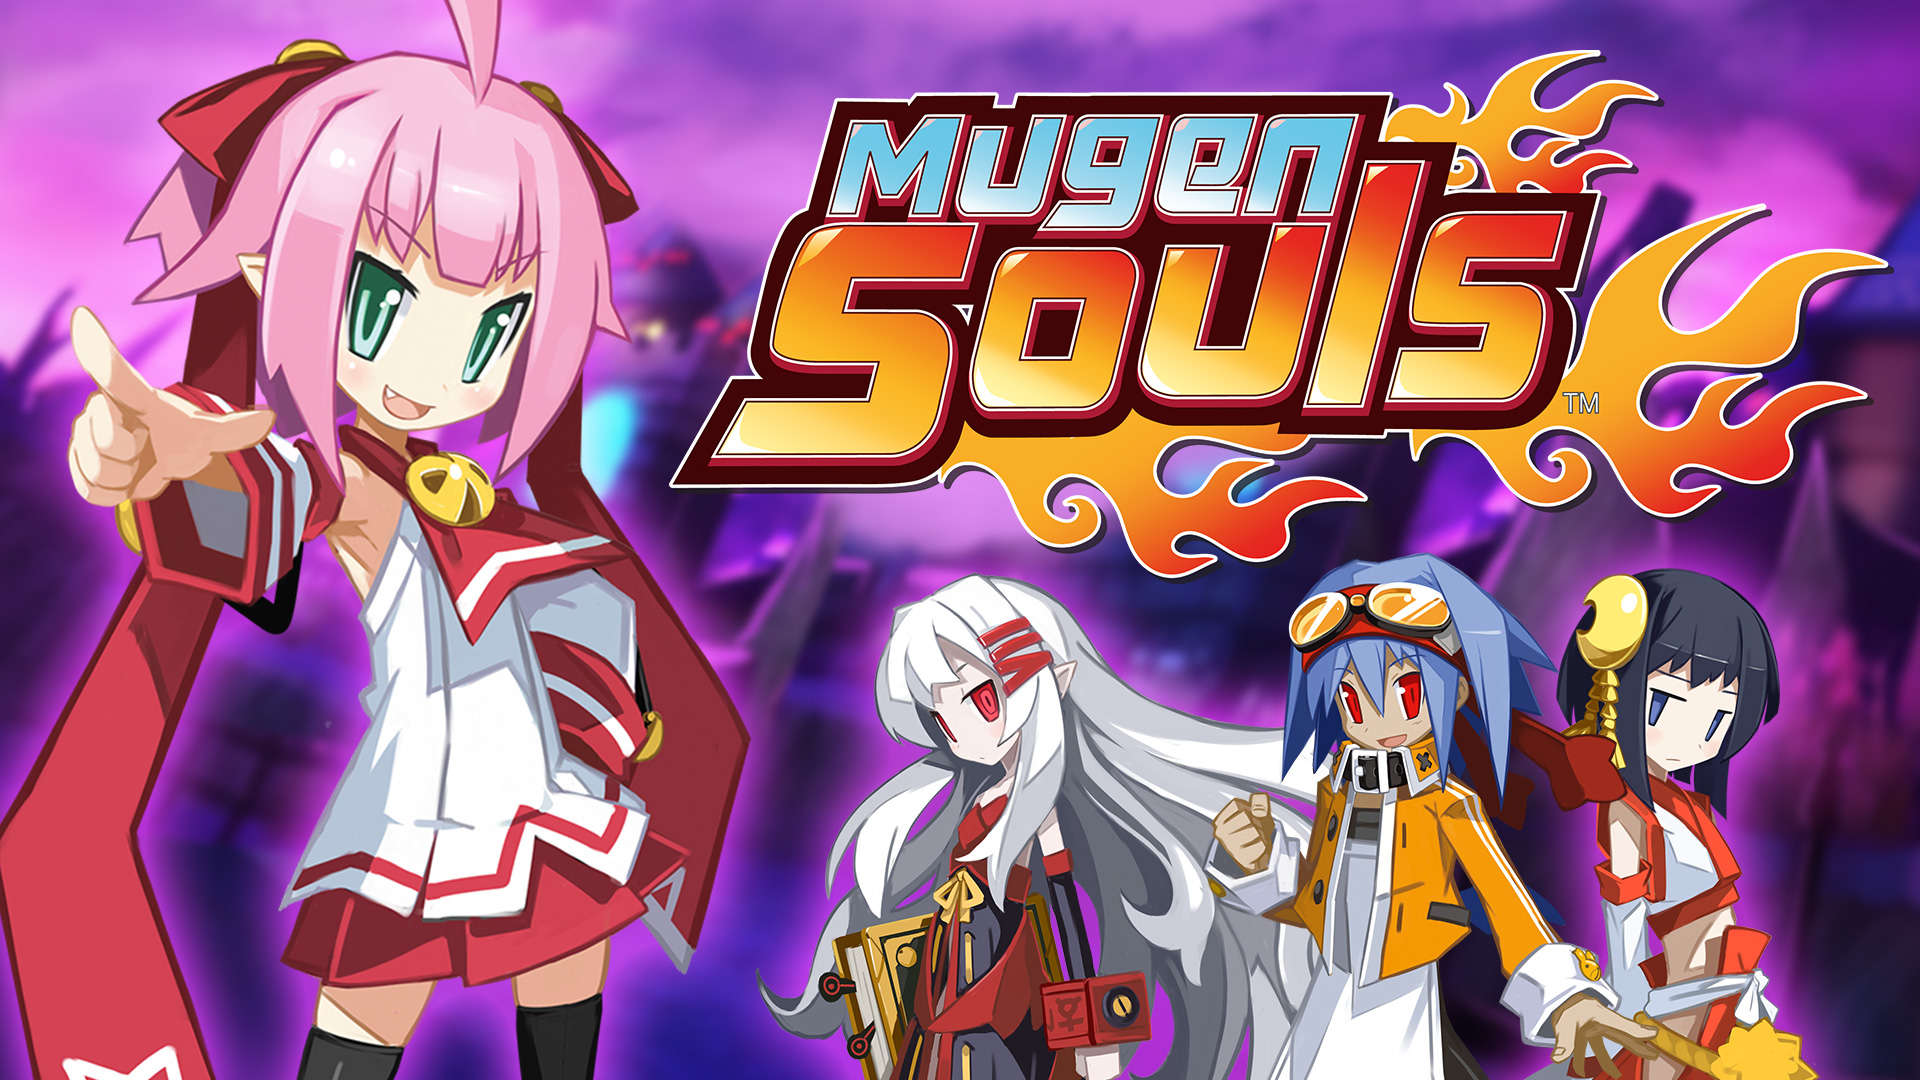 The key art for Mugen Souls, featuring four characters and the logo.